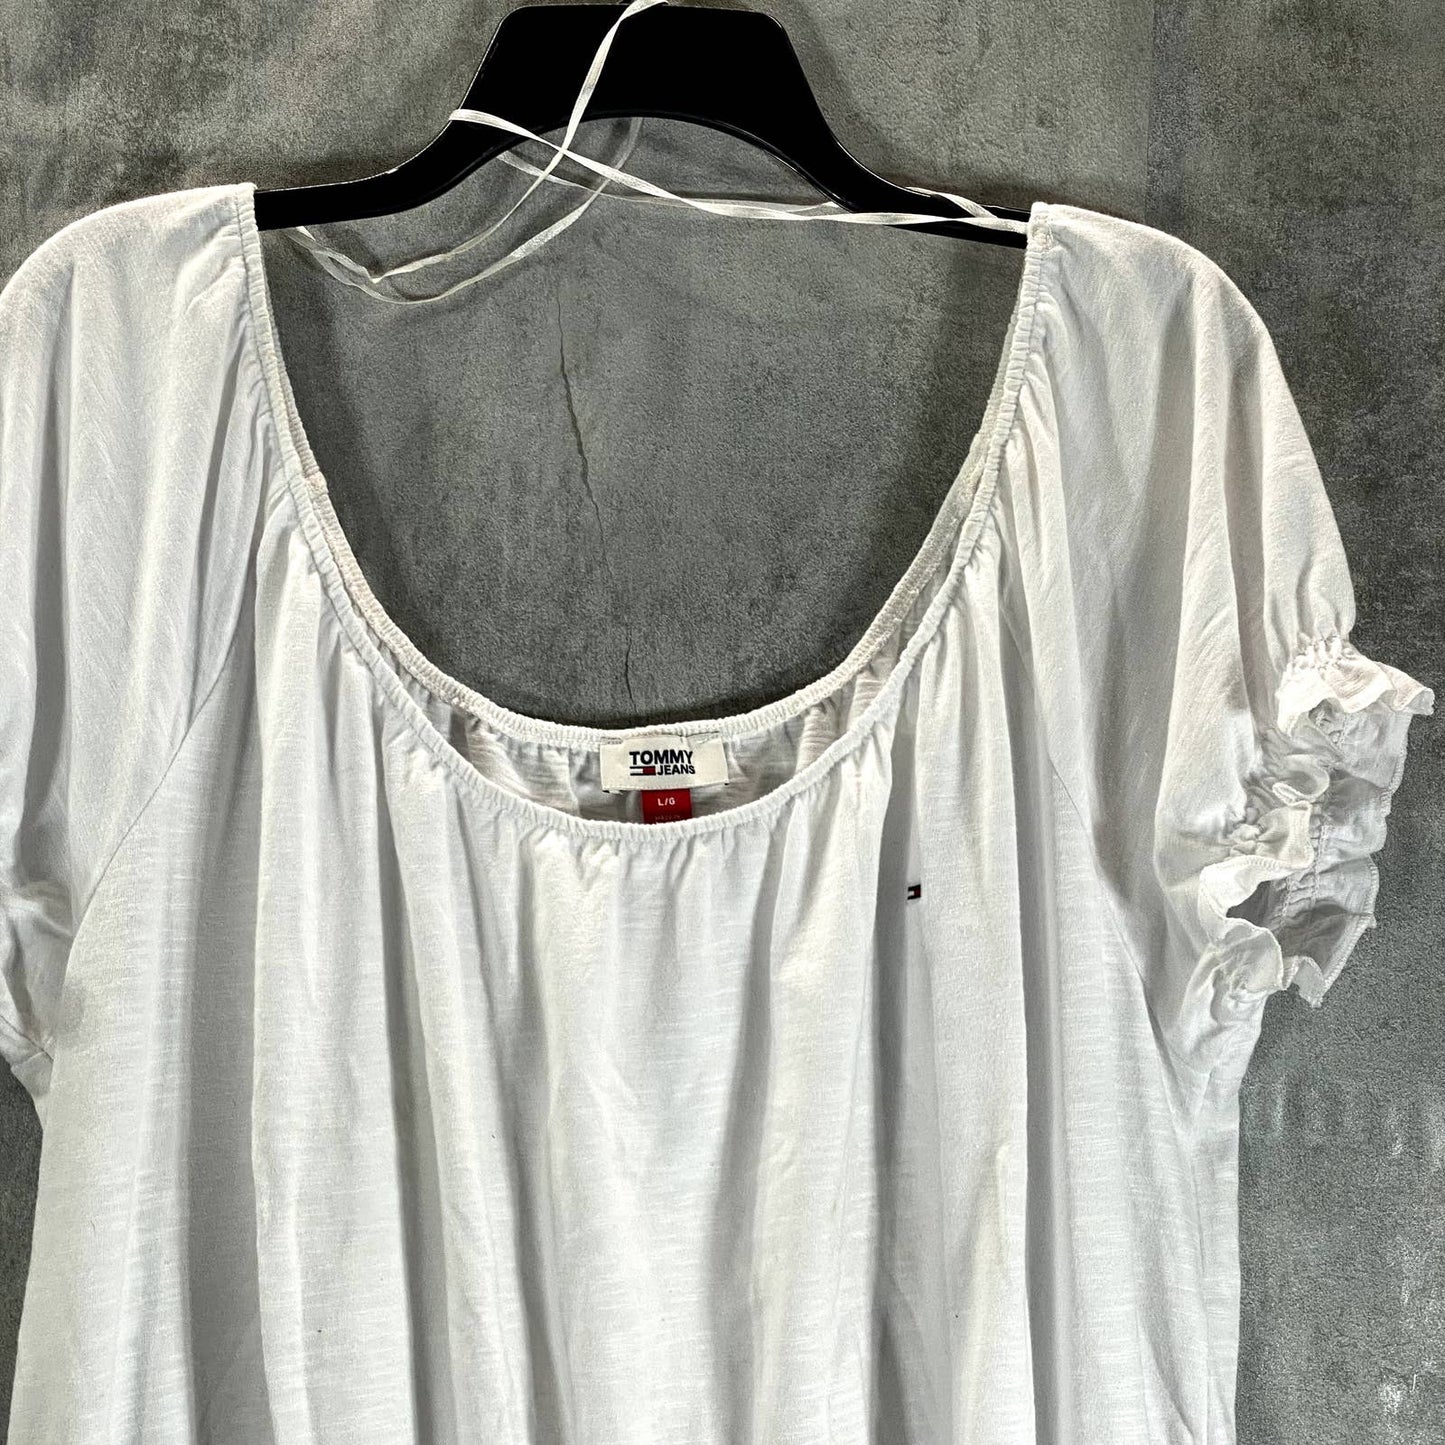 TOMMY JEANS Women's White Smocked Scoop-Neck Short Sleeve Peasant Top SZ L